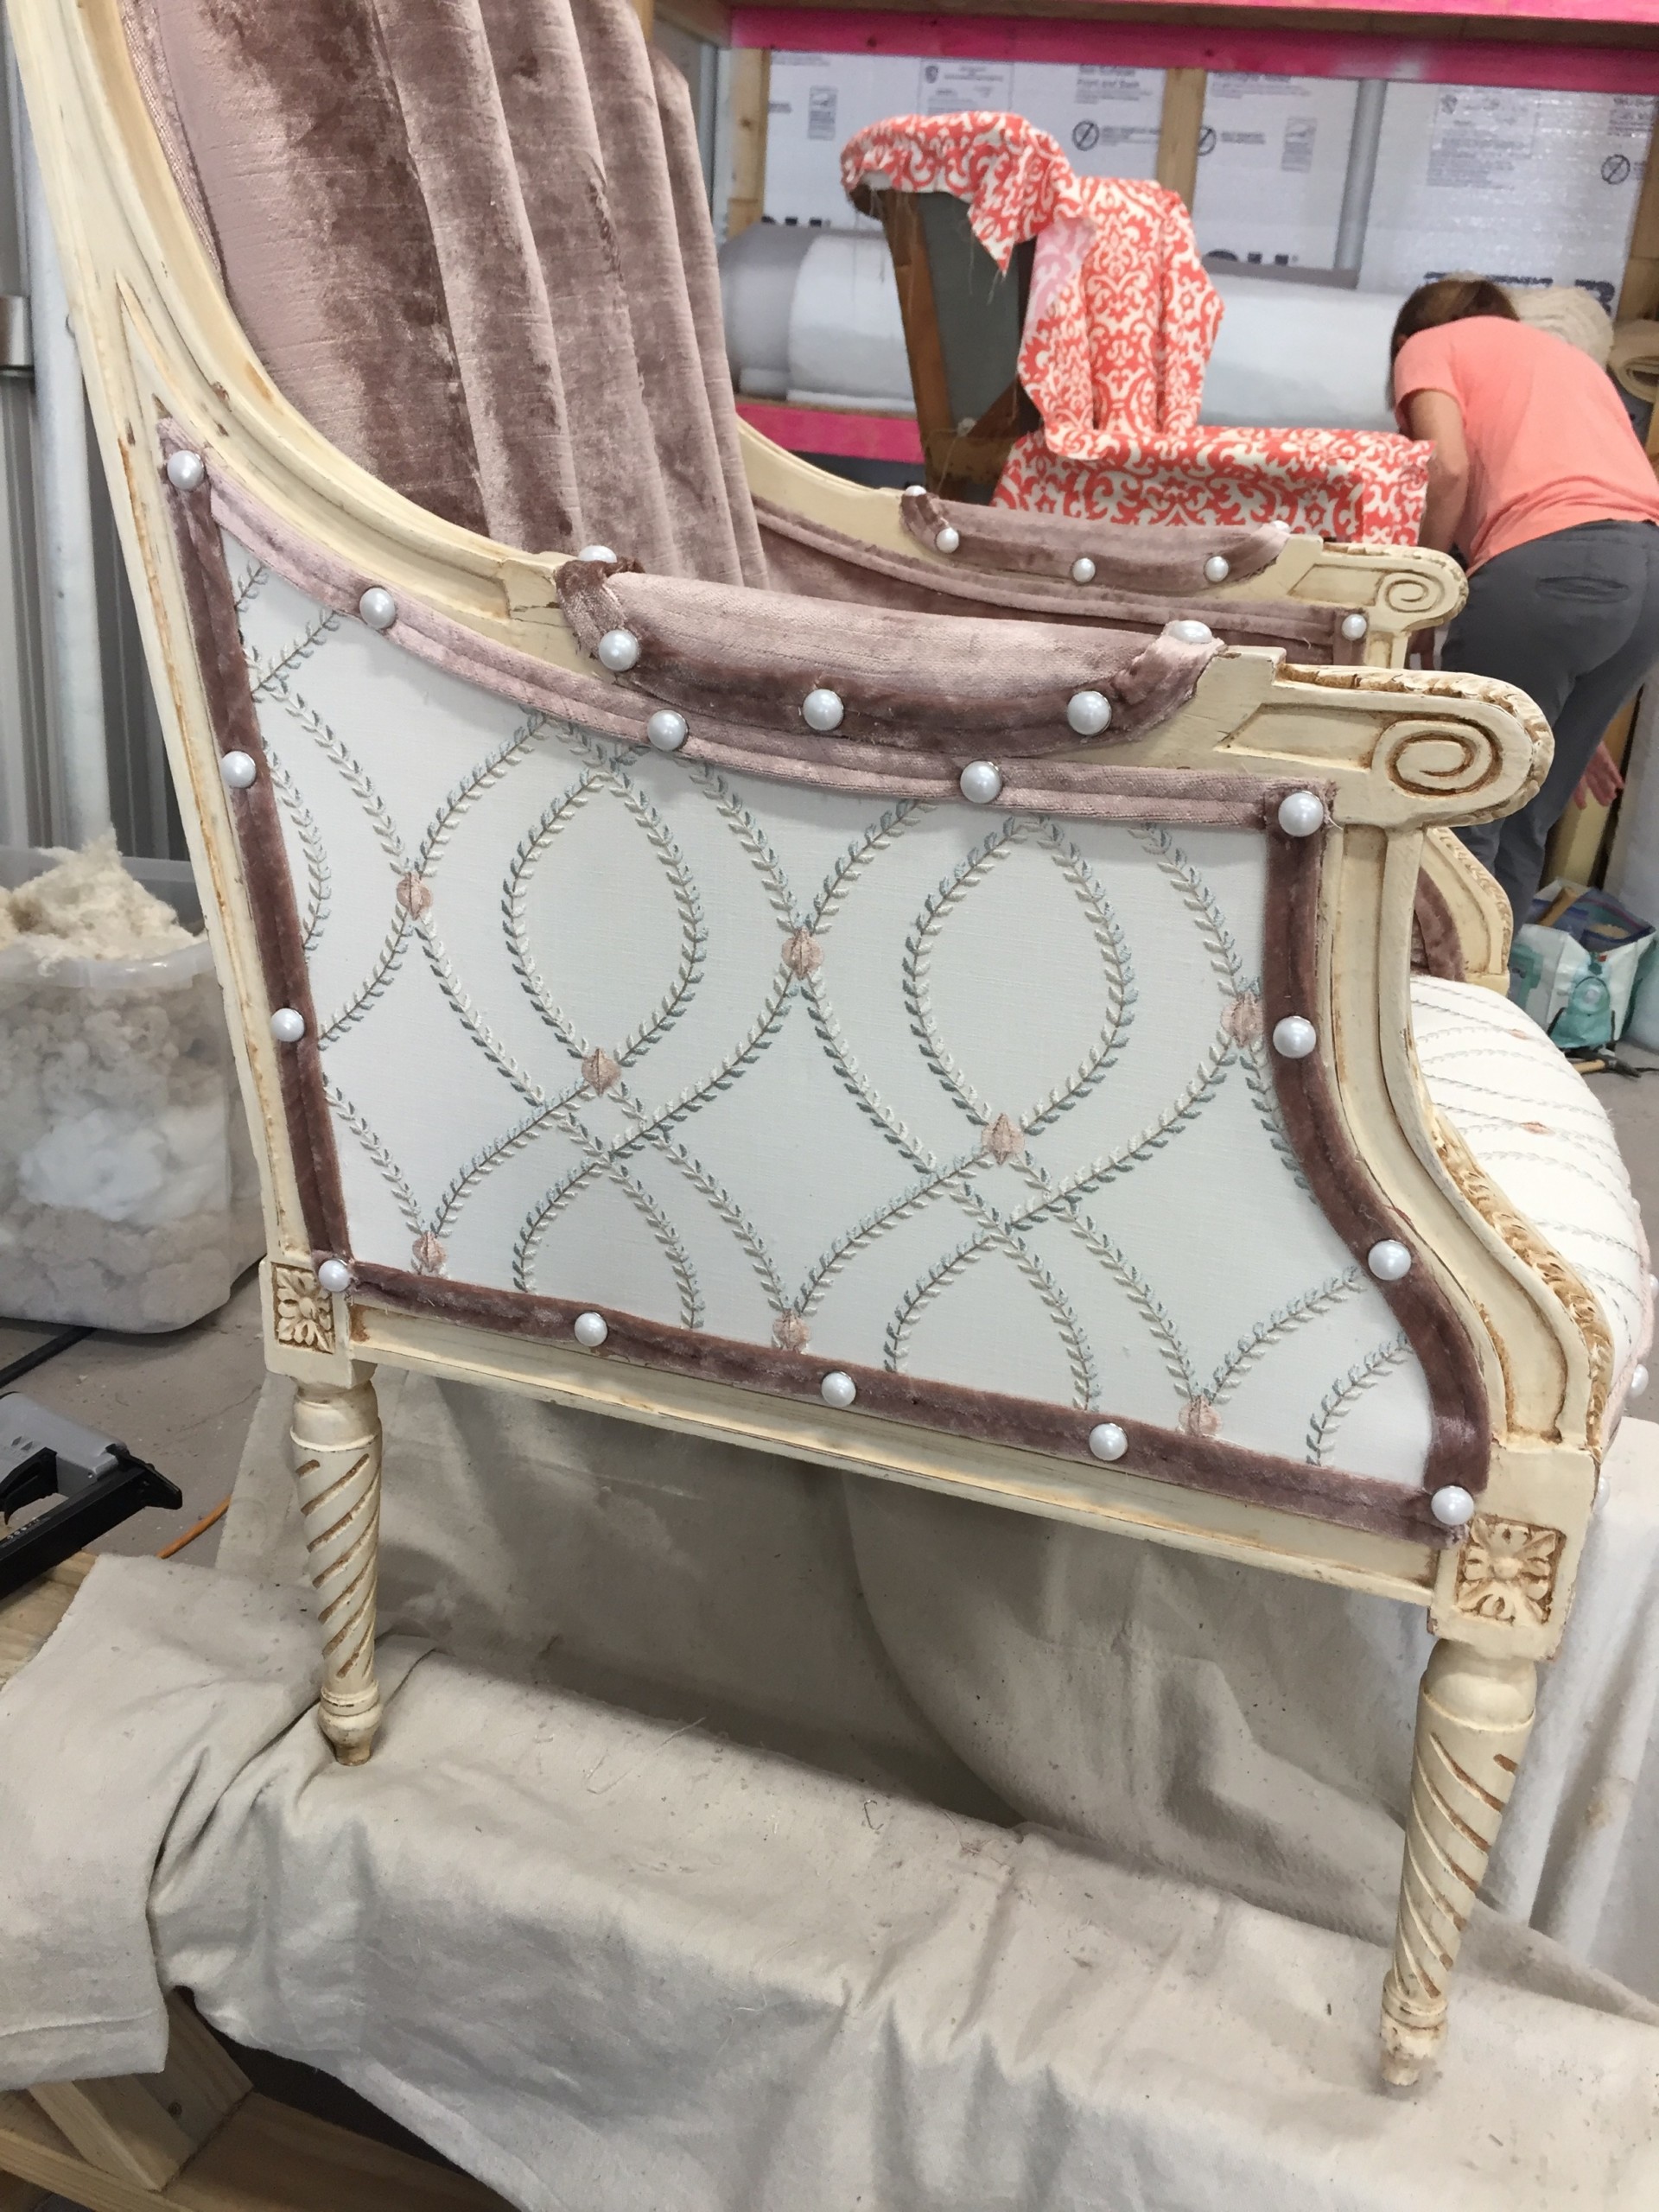 Pink and pearls for Karly's chair